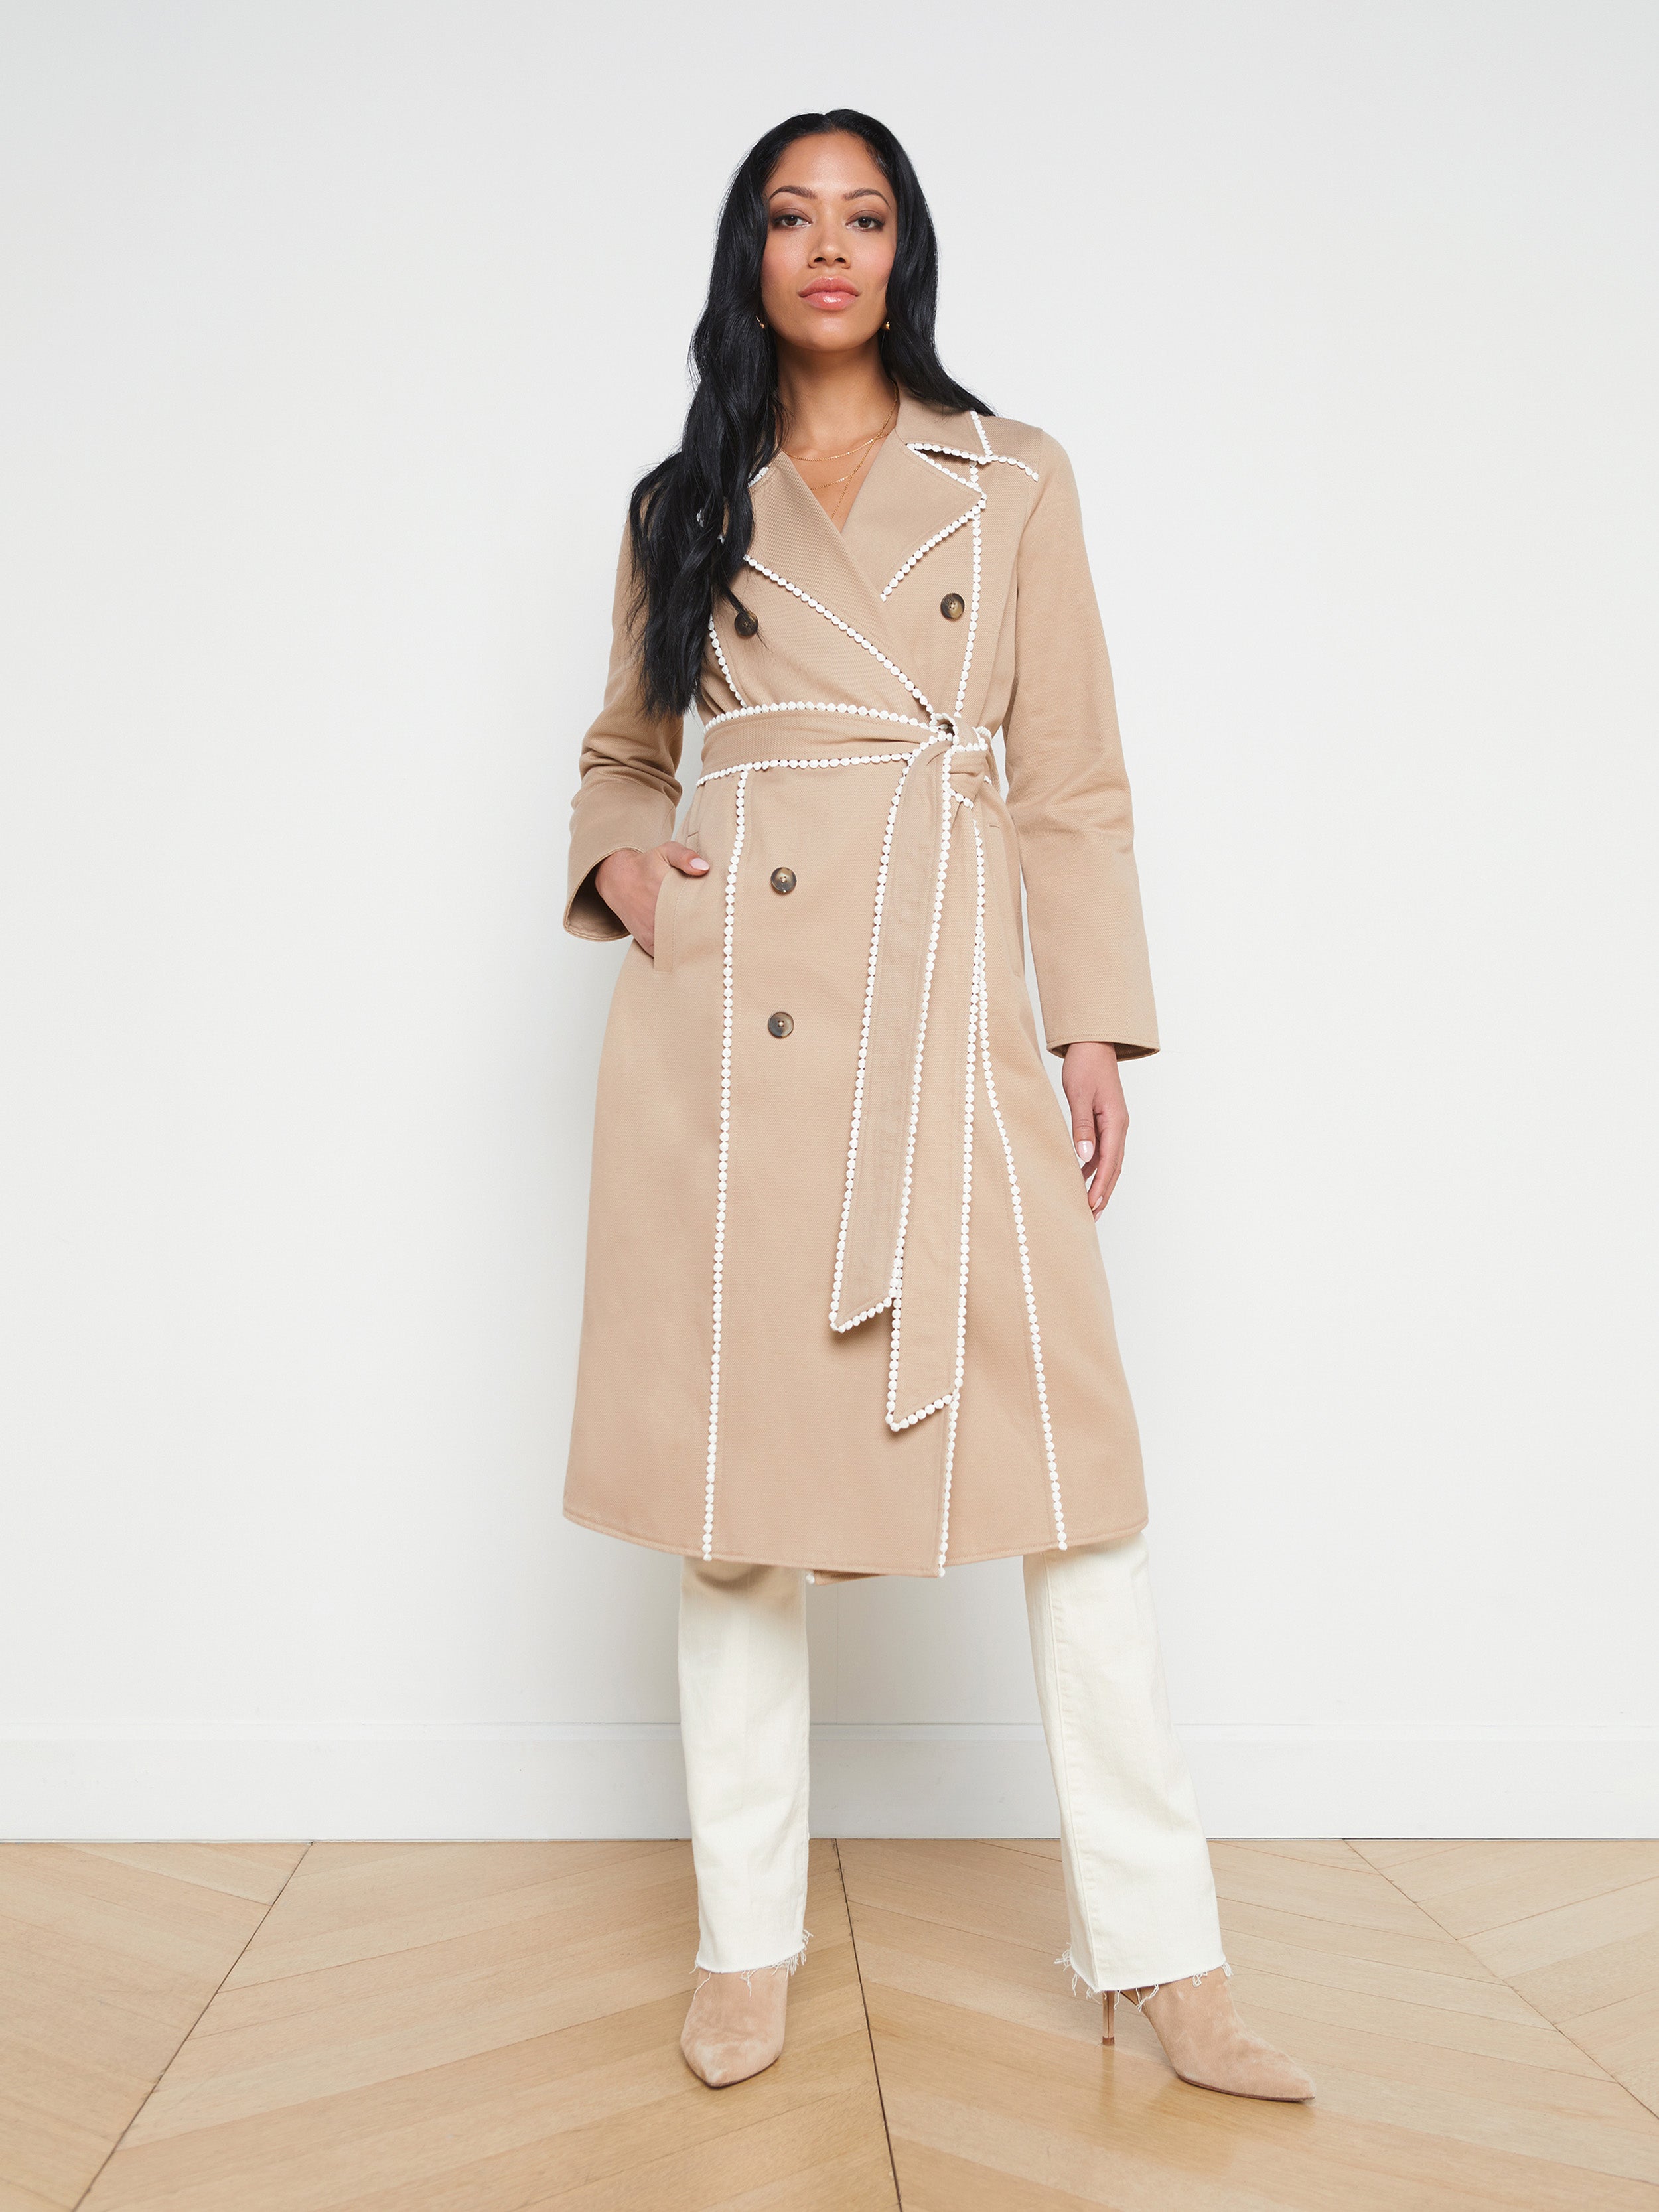 L'AGENCE - Venus Cotton Trench Coat with Trim in Almond